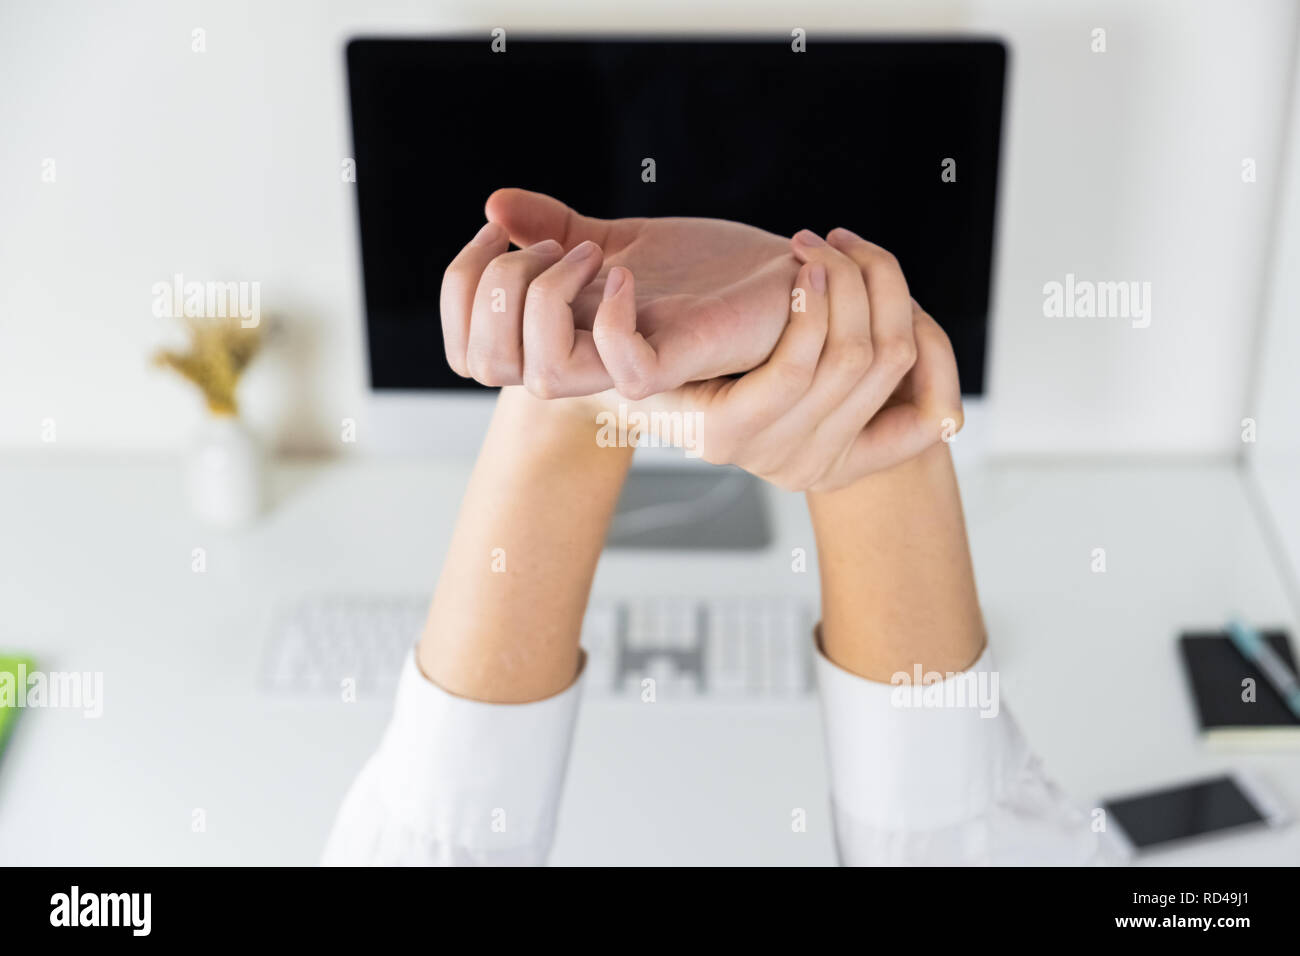 Stretching arms in sparse office workplace. Hands of an employee in front of modern desktop, overwork and tiredness concept Stock Photo